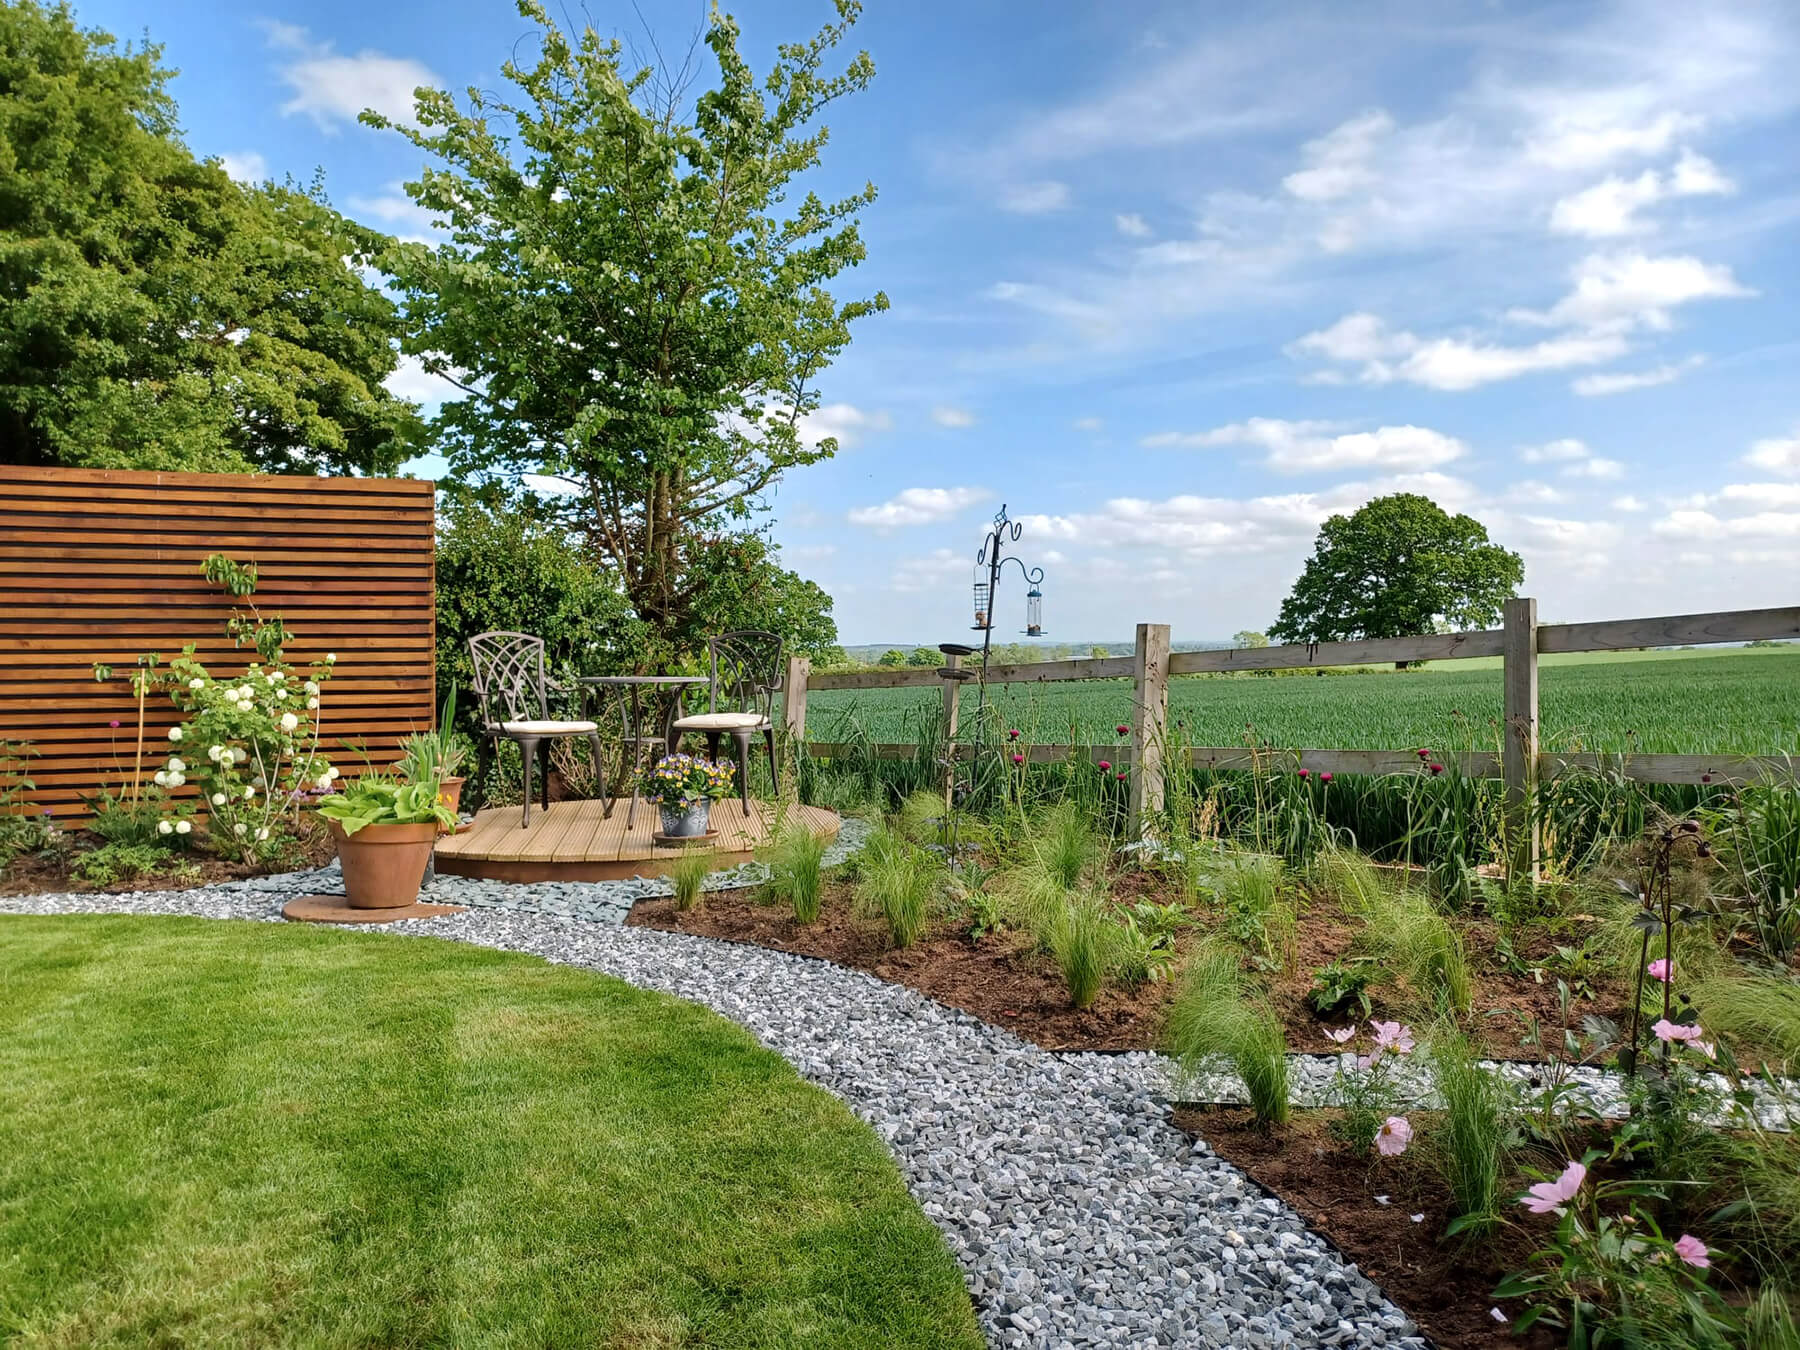 Garden Design with Prairie Planting and Seating Area